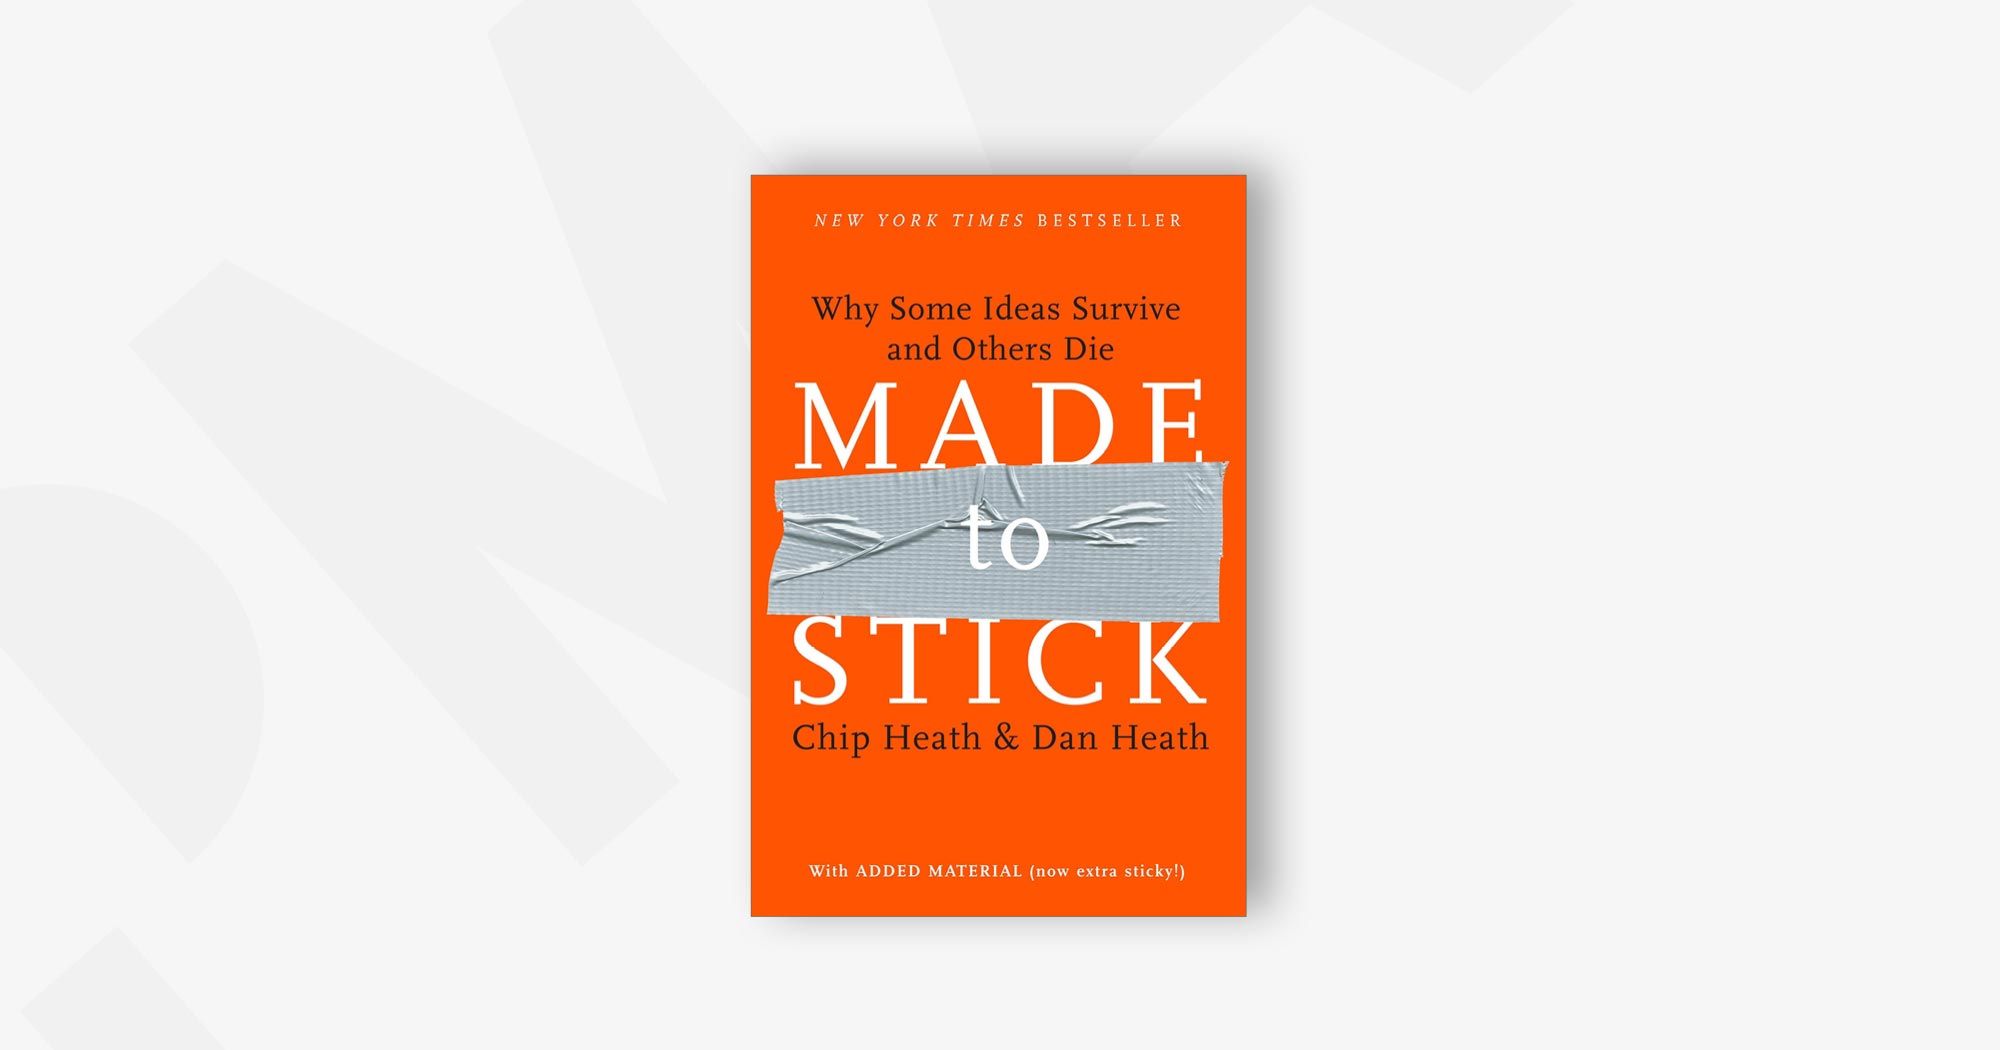 Made to Stick: Why Some Ideas Survive and Others Die – Chip Heath and Dan Heath